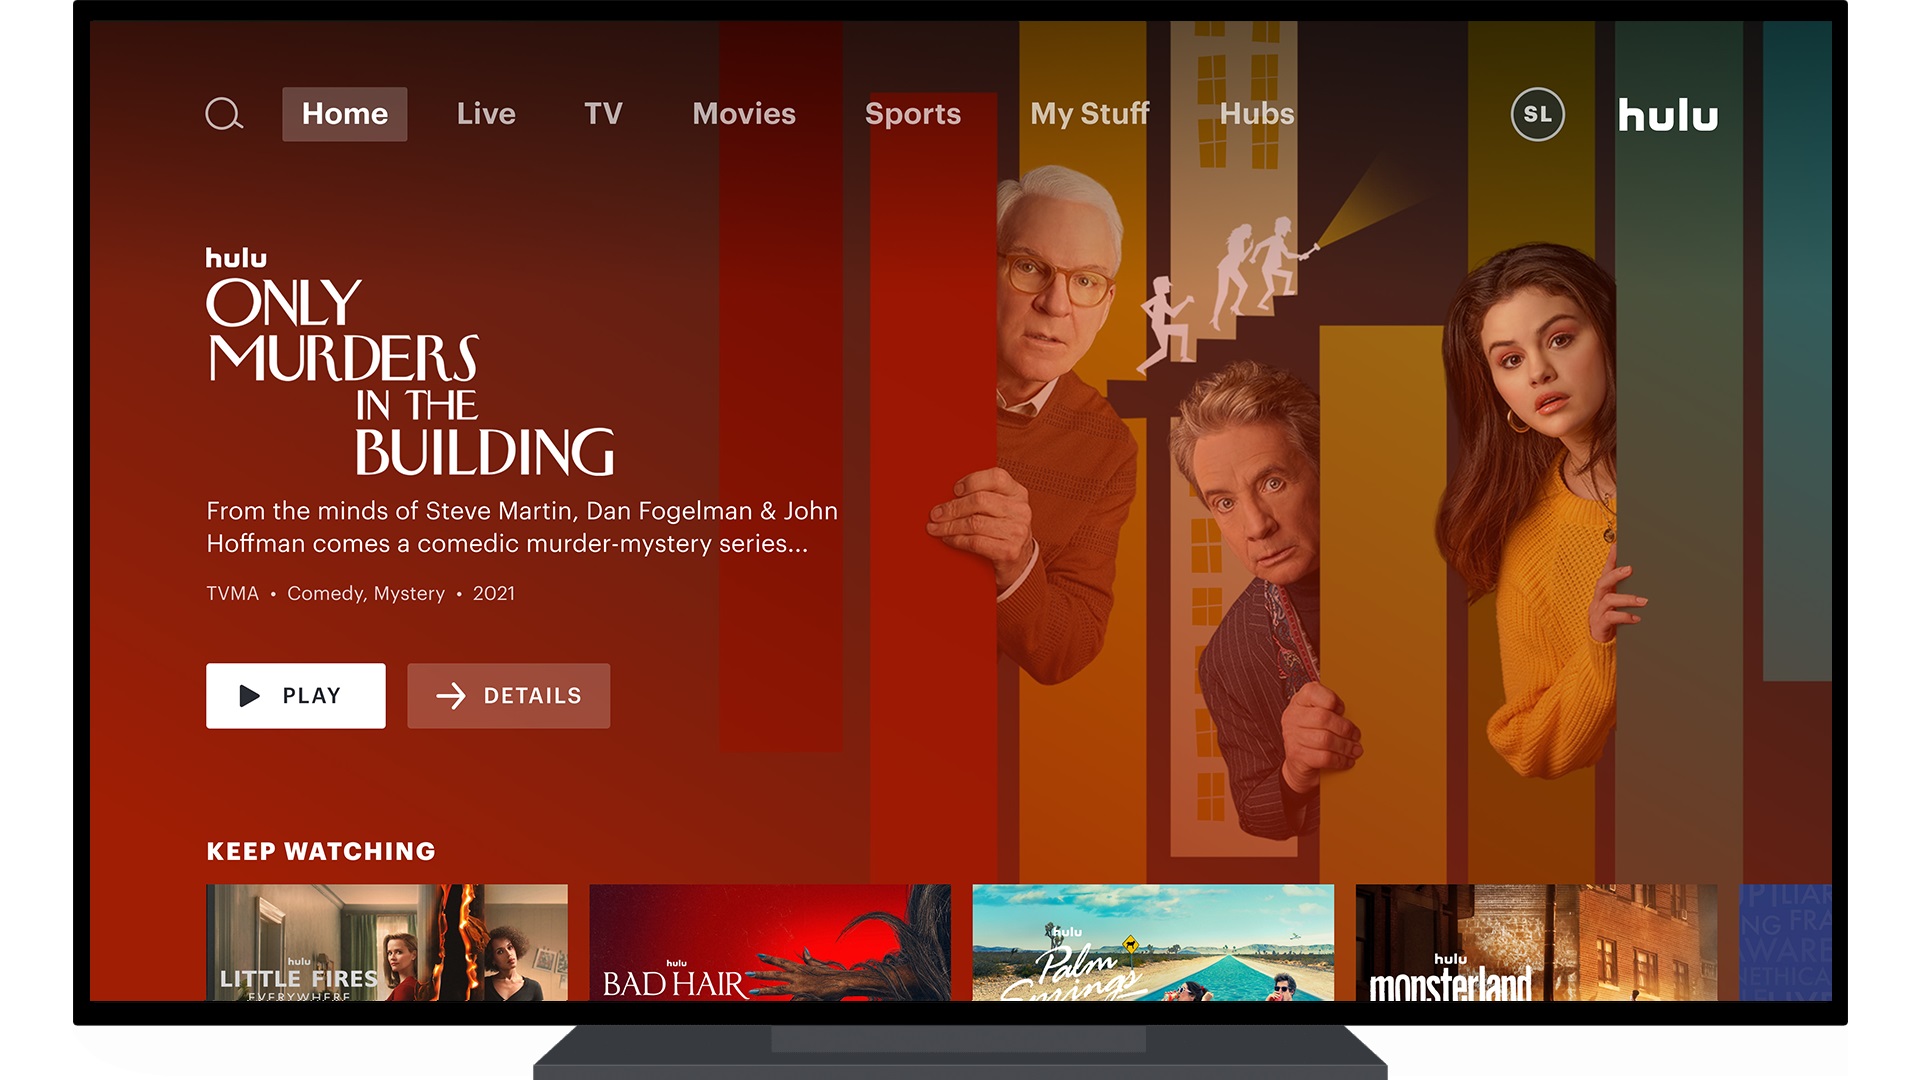 Hulu + Live TV adds 14 channels to its lineup